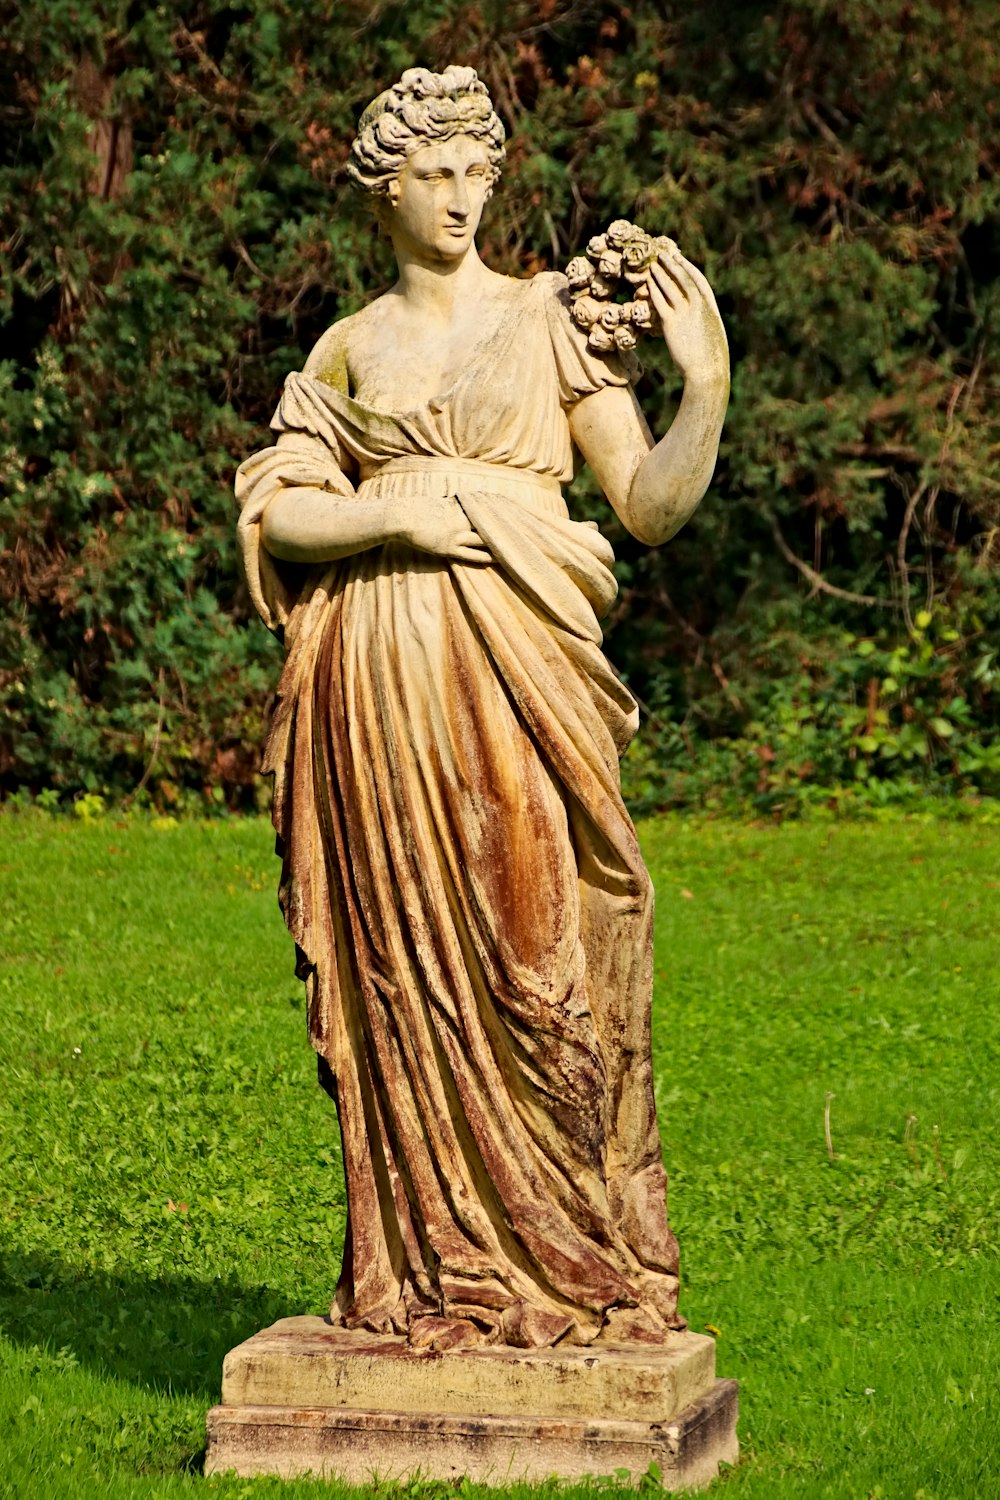 a statue of a woman holding grapes in her hands